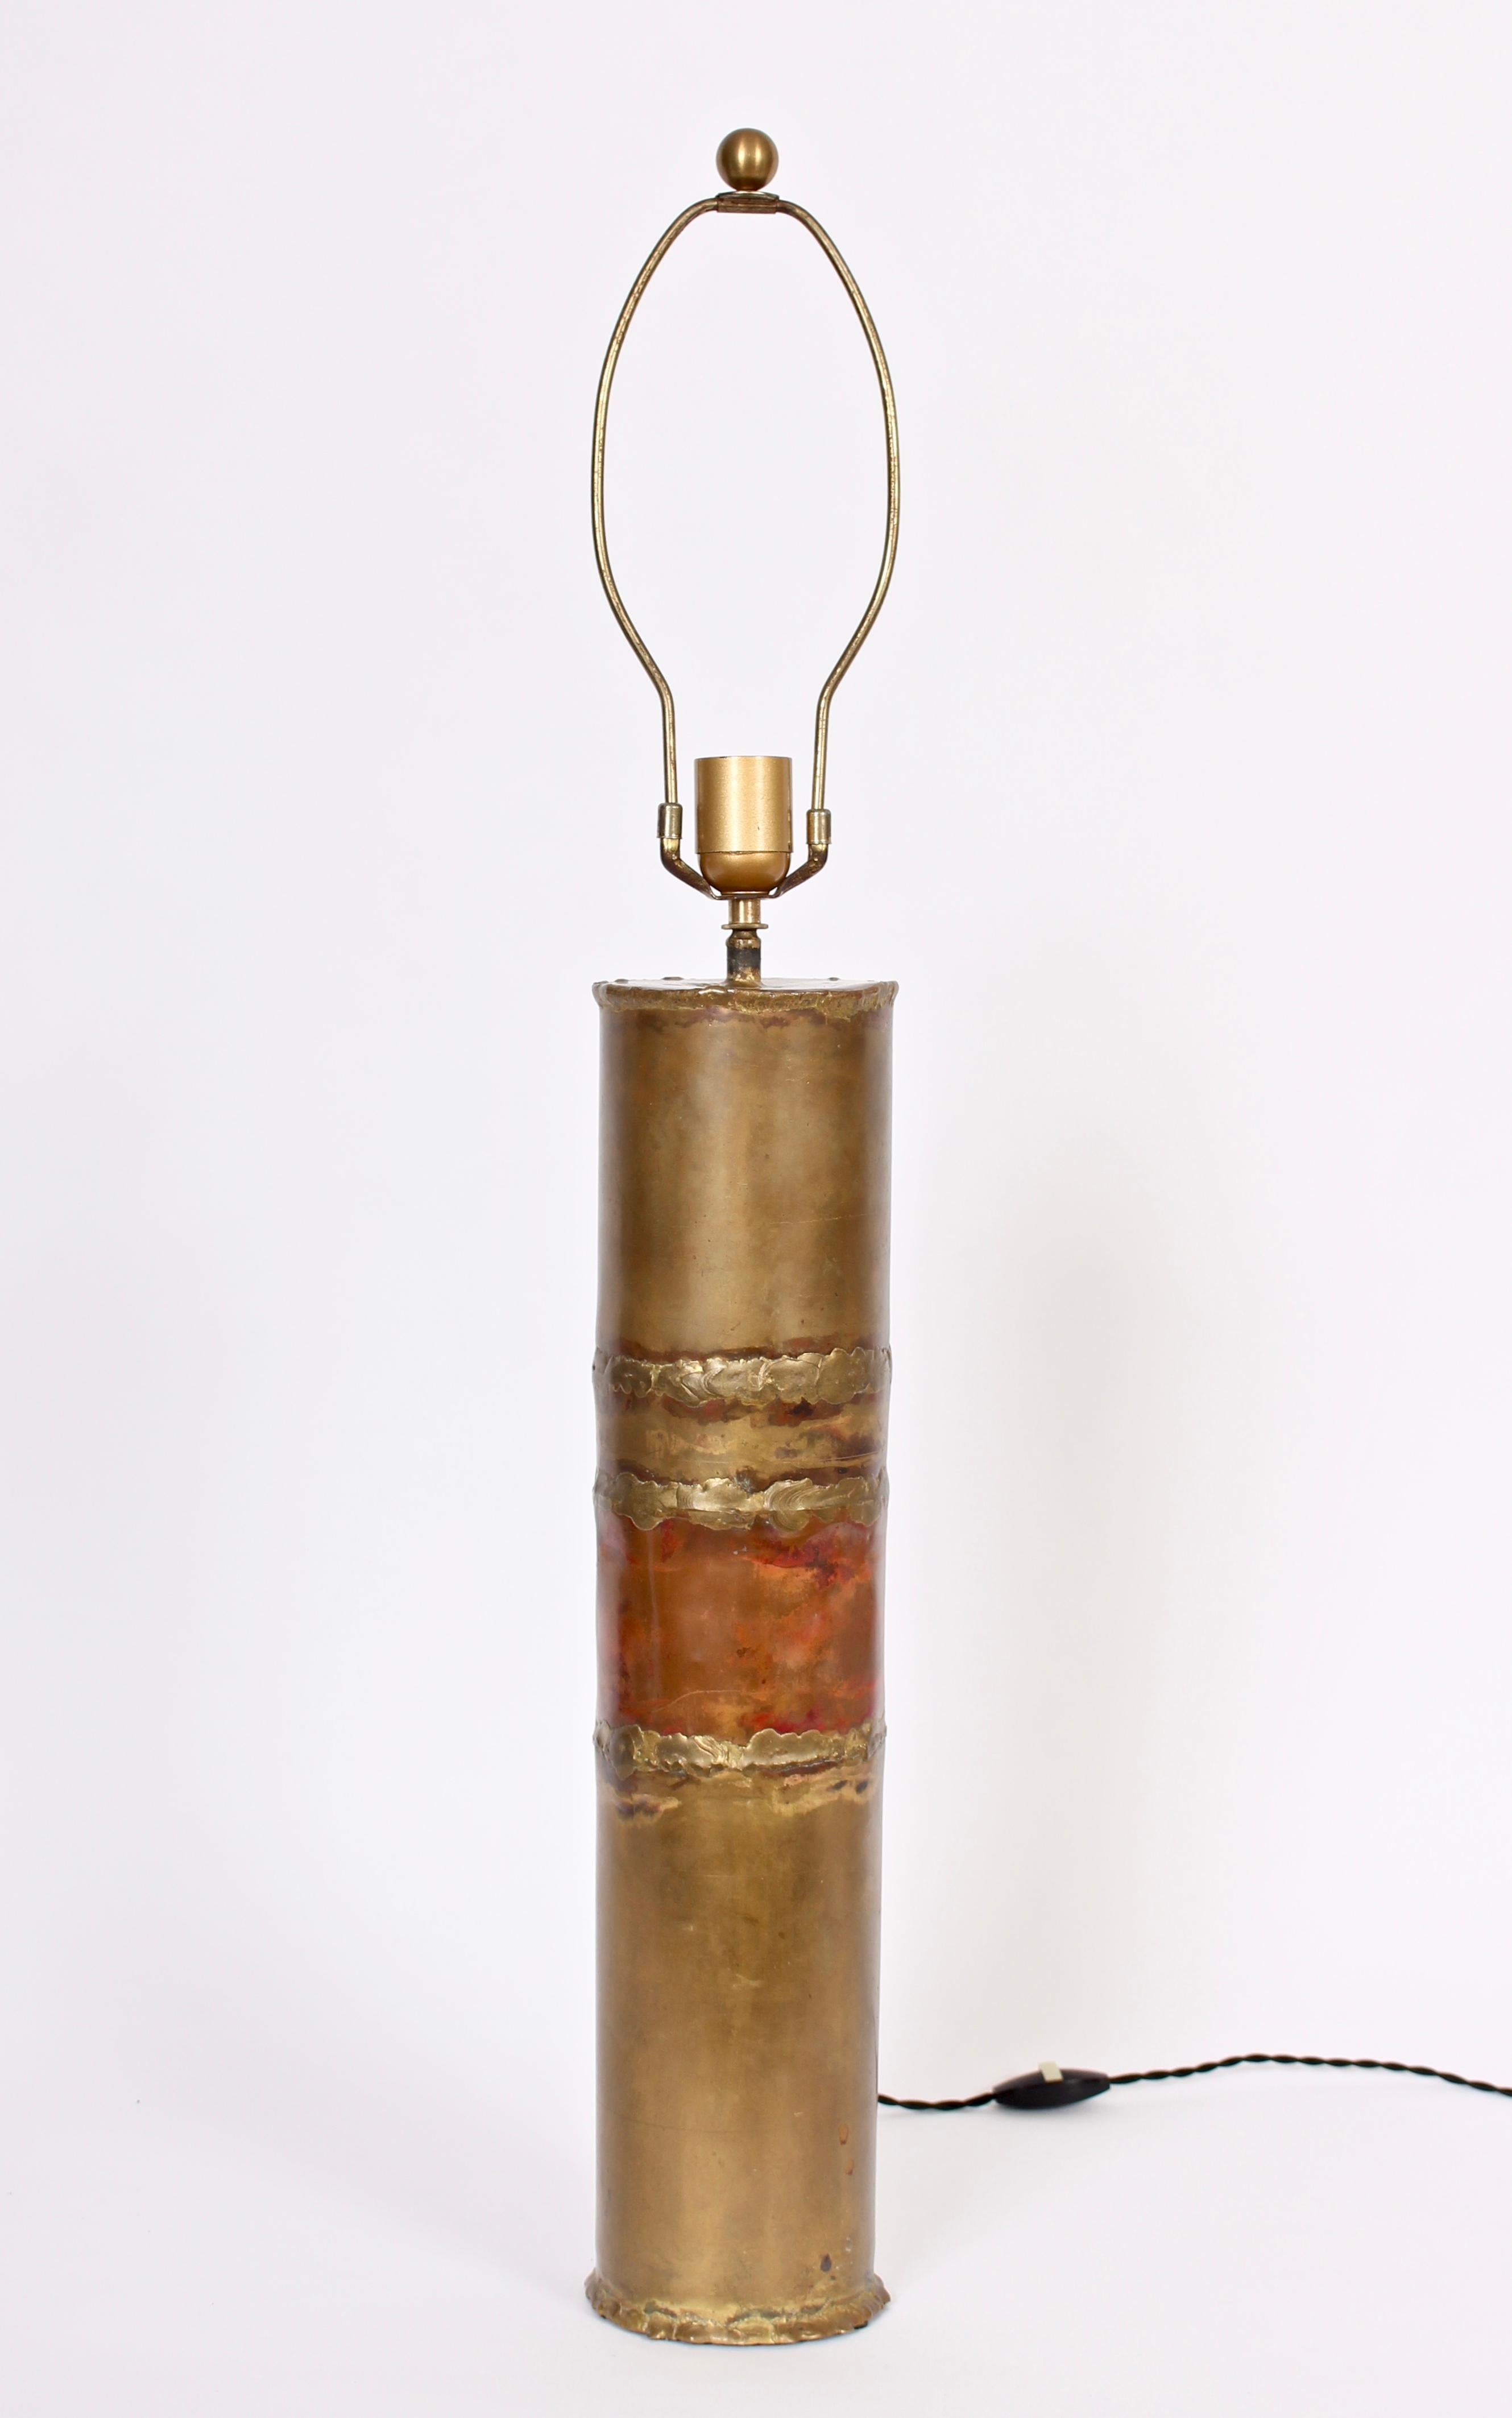 Substantial Silas Seandel Torched Mixed Metal Brutalist Table Lamp, 1974 In Good Condition For Sale In Bainbridge, NY